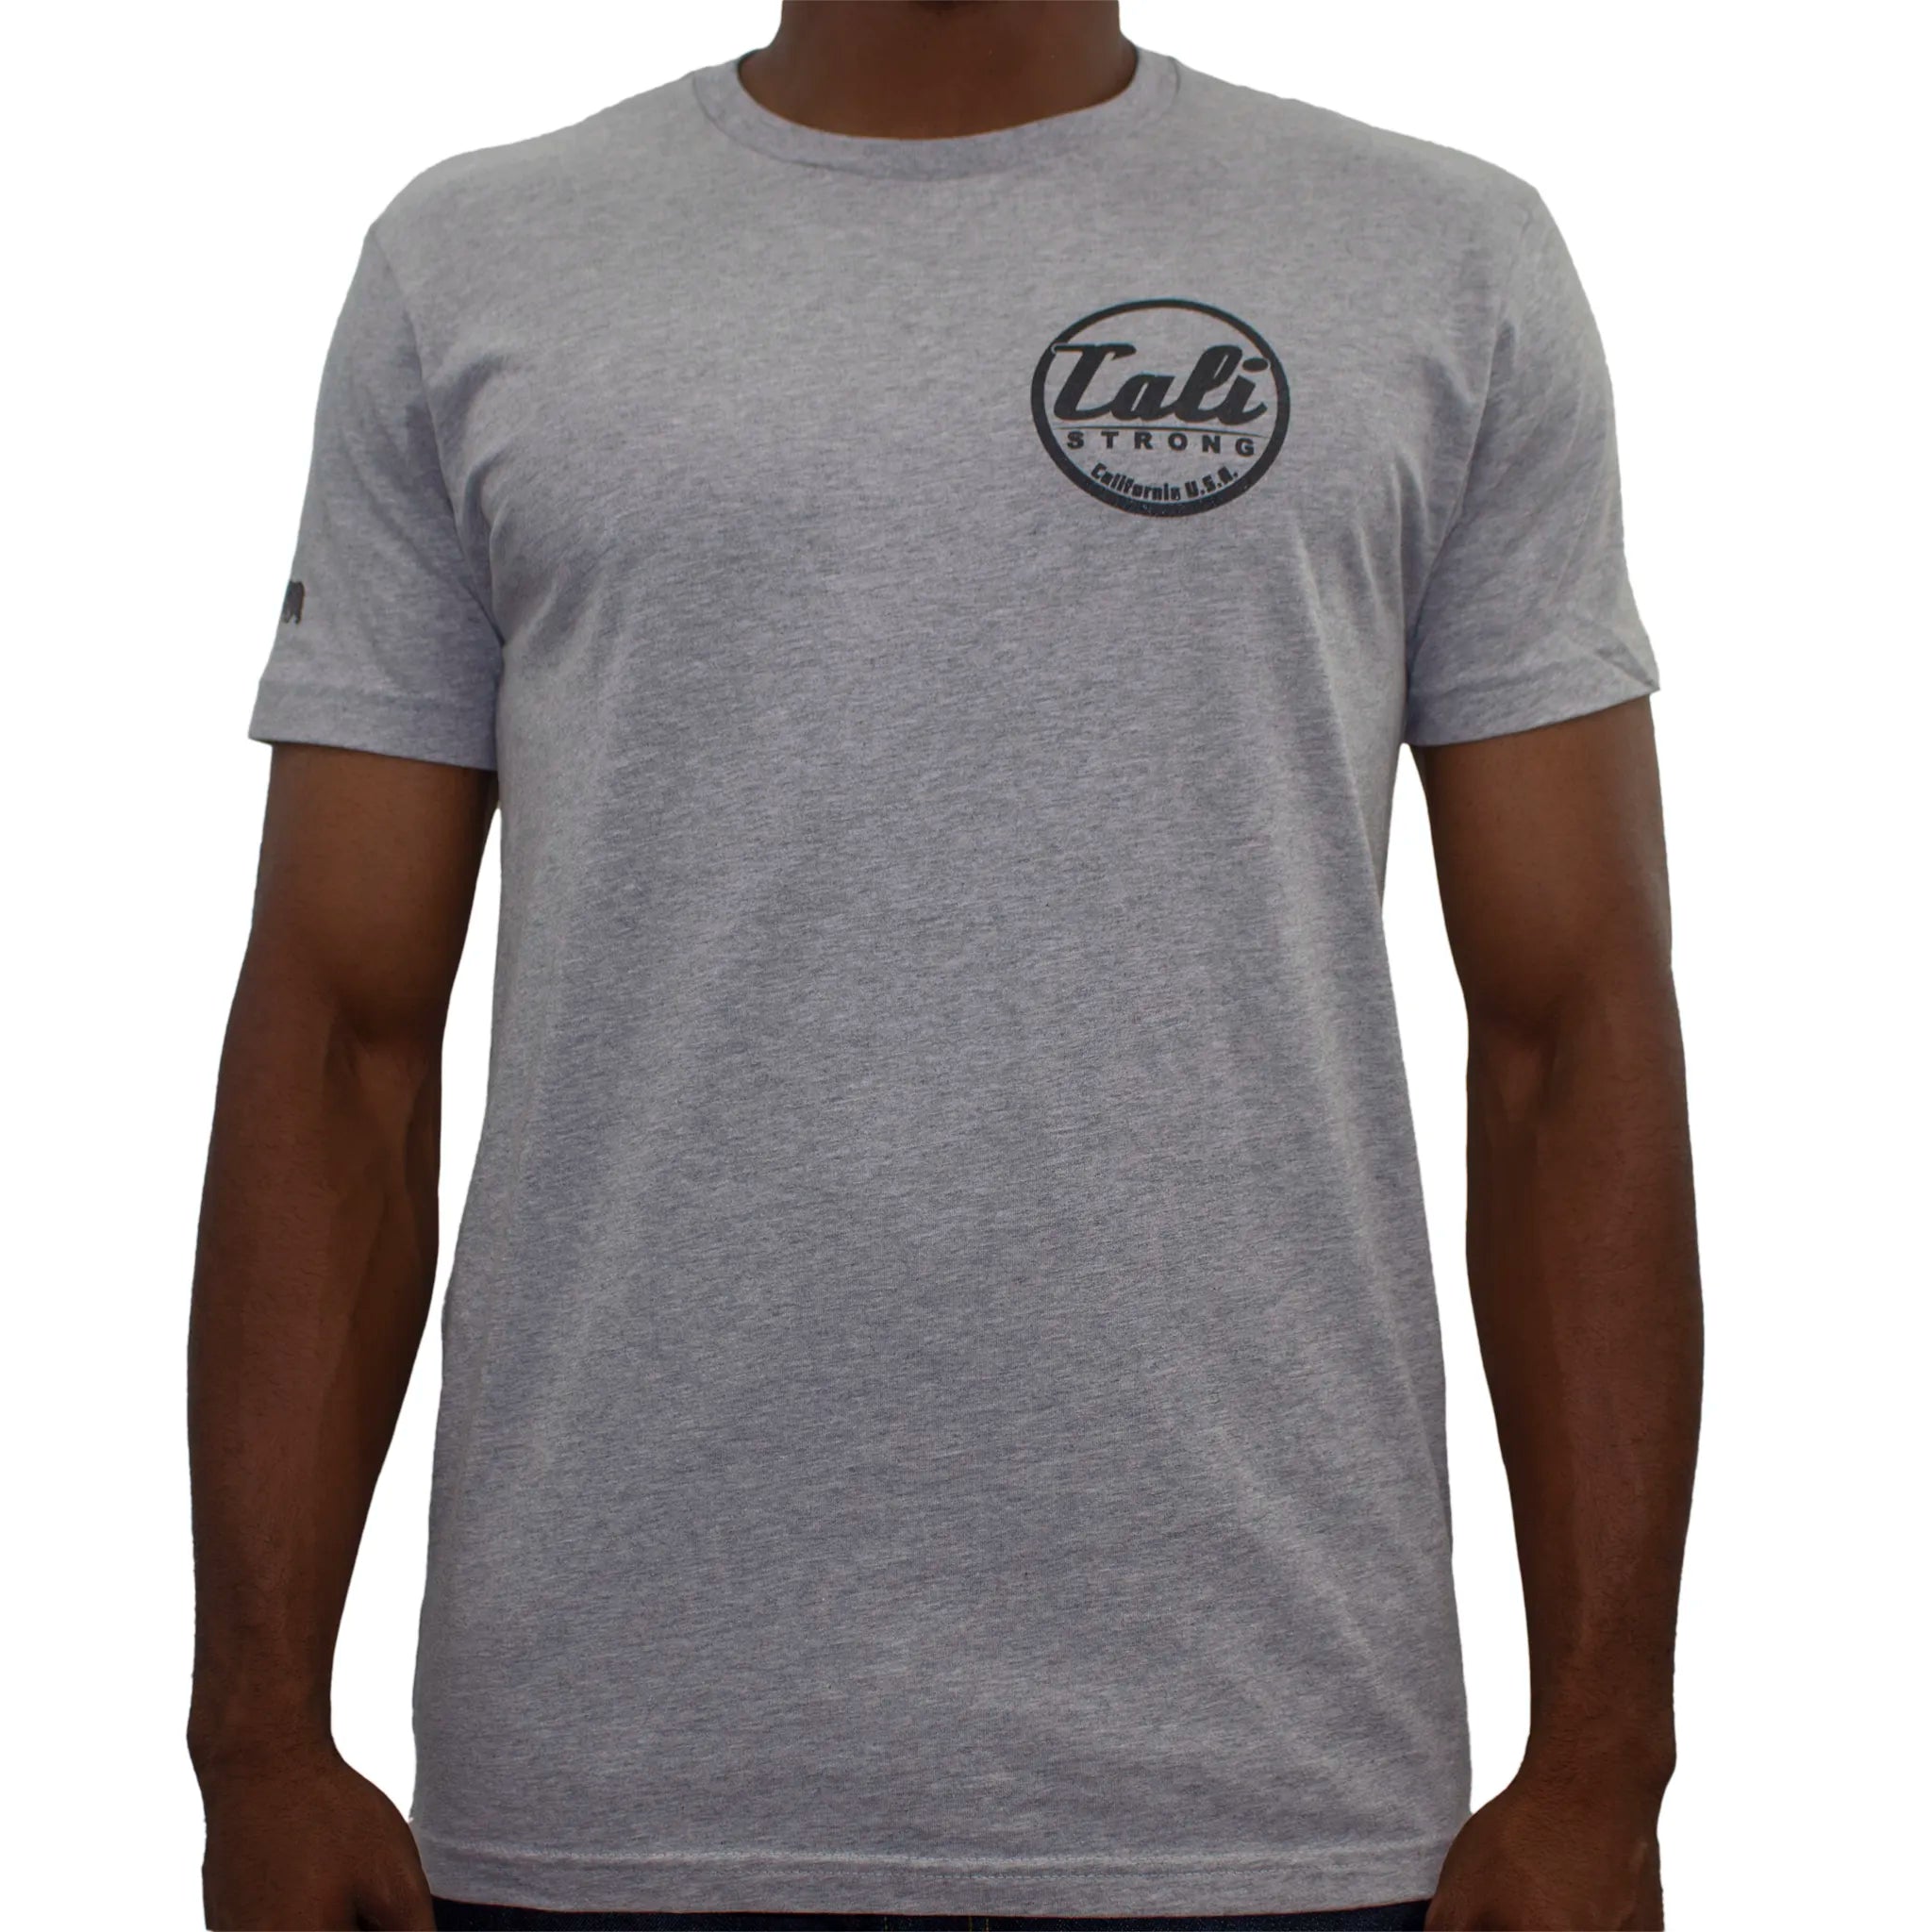 CALI Strong Classic T-Shirt Heather Grey Glow in the Dark - T-Shirt - Image 1 - CALI Strong